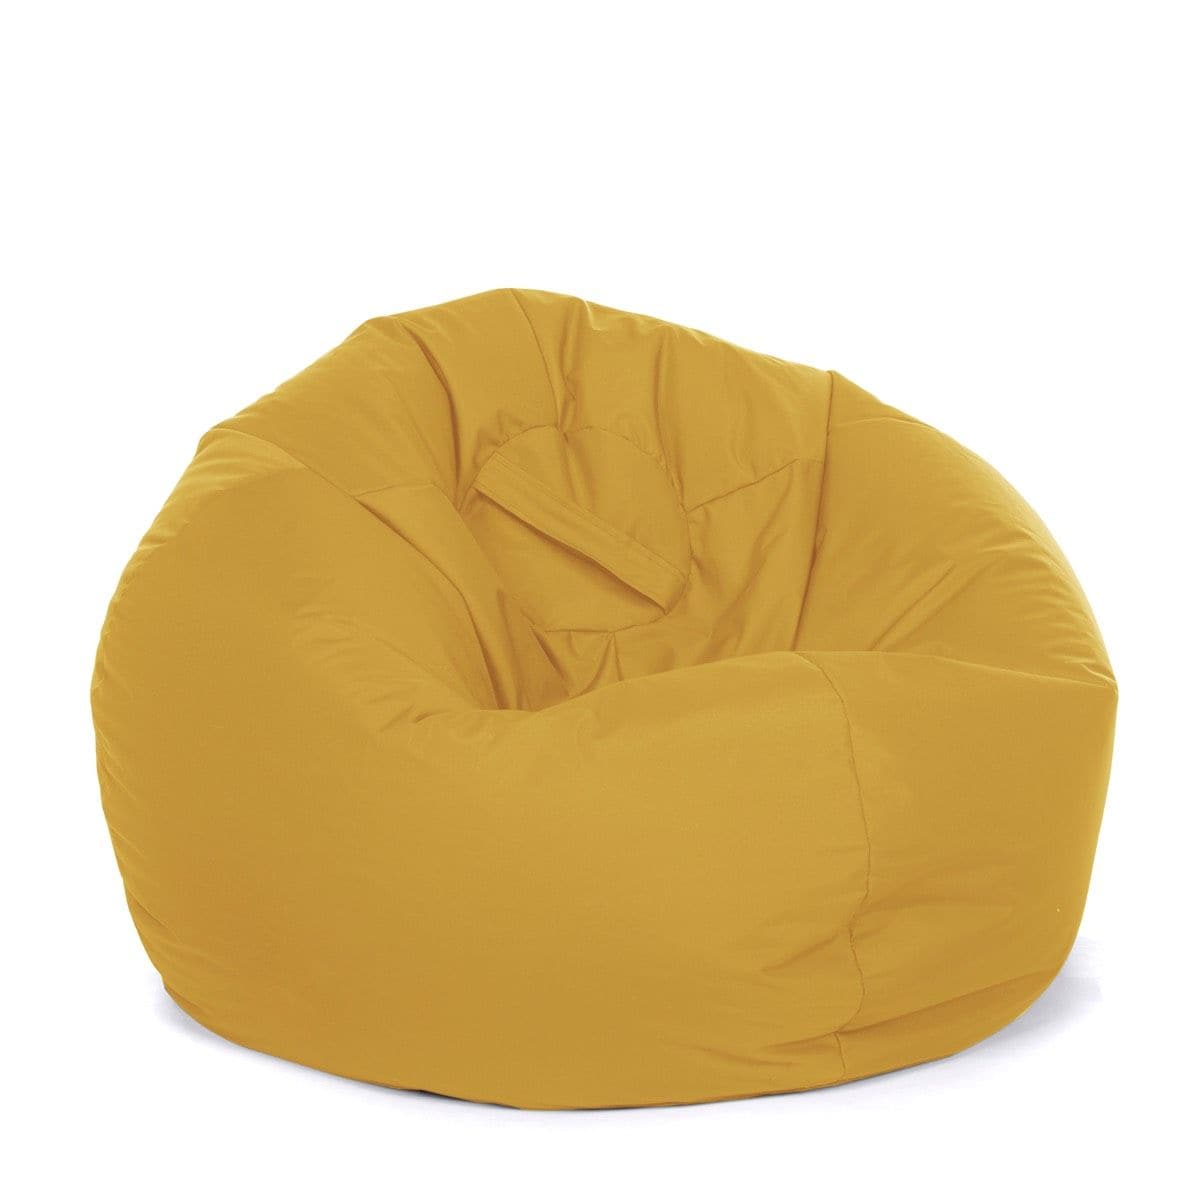 Primary Bean Bag Classic, The Primary Bean Bag Classic brings a bit of retro style to the classroom or home with this primary classic bean bag. The Primary Bean Bag Classic is perfect for sitting together in groups, this bean bag is an all time favourite. Soft, shower-proof and UV Resistant material Our Indoor/Outdoor bean bags are made from a soft, shower-proof and UV Resistant material - meaning the sun and rain won't damage them! Although perfectly suited for use outside, the Indoor/Outdoor bean bags are